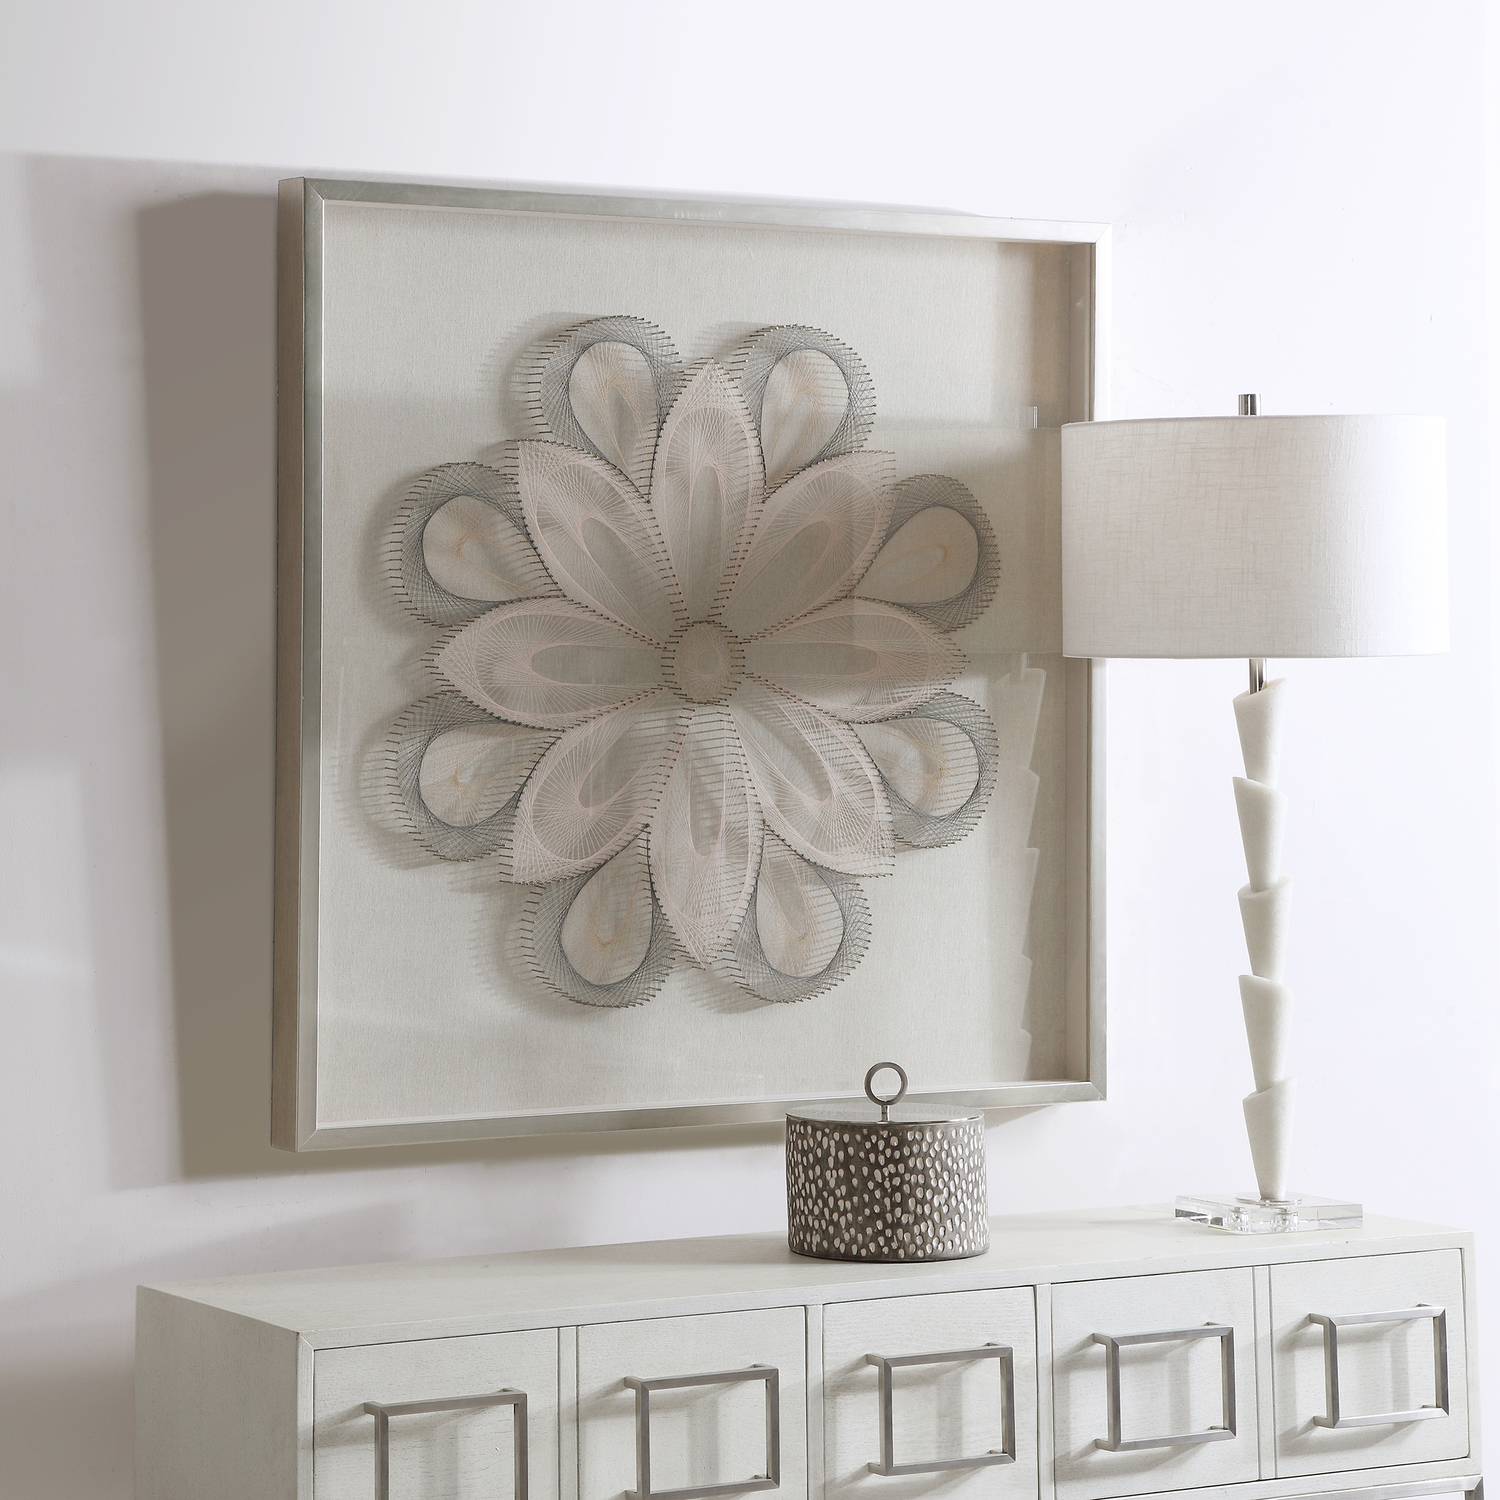  Uttermost Shadow Box Boxes and Bookends This Statement Making Shadow Box Features 3-dimensional Layered String Art, Hand Threaded Around Individually Hammered Pin Nails In Shades Of Slate Gray, Tan And Blush, Over A Neutral Linen Backing With A Silver Leaf Frame.